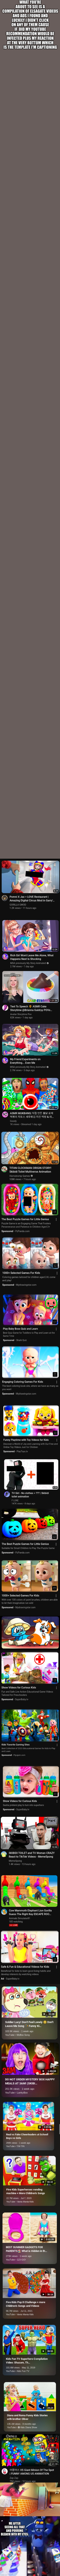 I swear to god if  they touch the smiling critters from Poppy Playtime: Deep Sleep pointy garry will not be a happy pyramid | WHAT YOU'RE ABOUT TO SEE IS A COMPILATION OF ELSAGATE VIDEOS AND ADS I FOUND AND LUCKILY I DIDN'T CLICK ON ANY OF THEM CAUSE IF  DID MY YOUTUBE RECOMMENDATION WOULD BE INFECTED PLUS MY REACTION AT THE VERY BOTTOM WHICH IS THE TEMPLATE I'M CAPTIONING; ME AFTER SEEING ALL THAT AND POURING BLEACH INTO MY EYES: | image tagged in bonnie scared,youtube kids,bleach,reaction,five nights at freddy's,bonnie | made w/ Imgflip meme maker